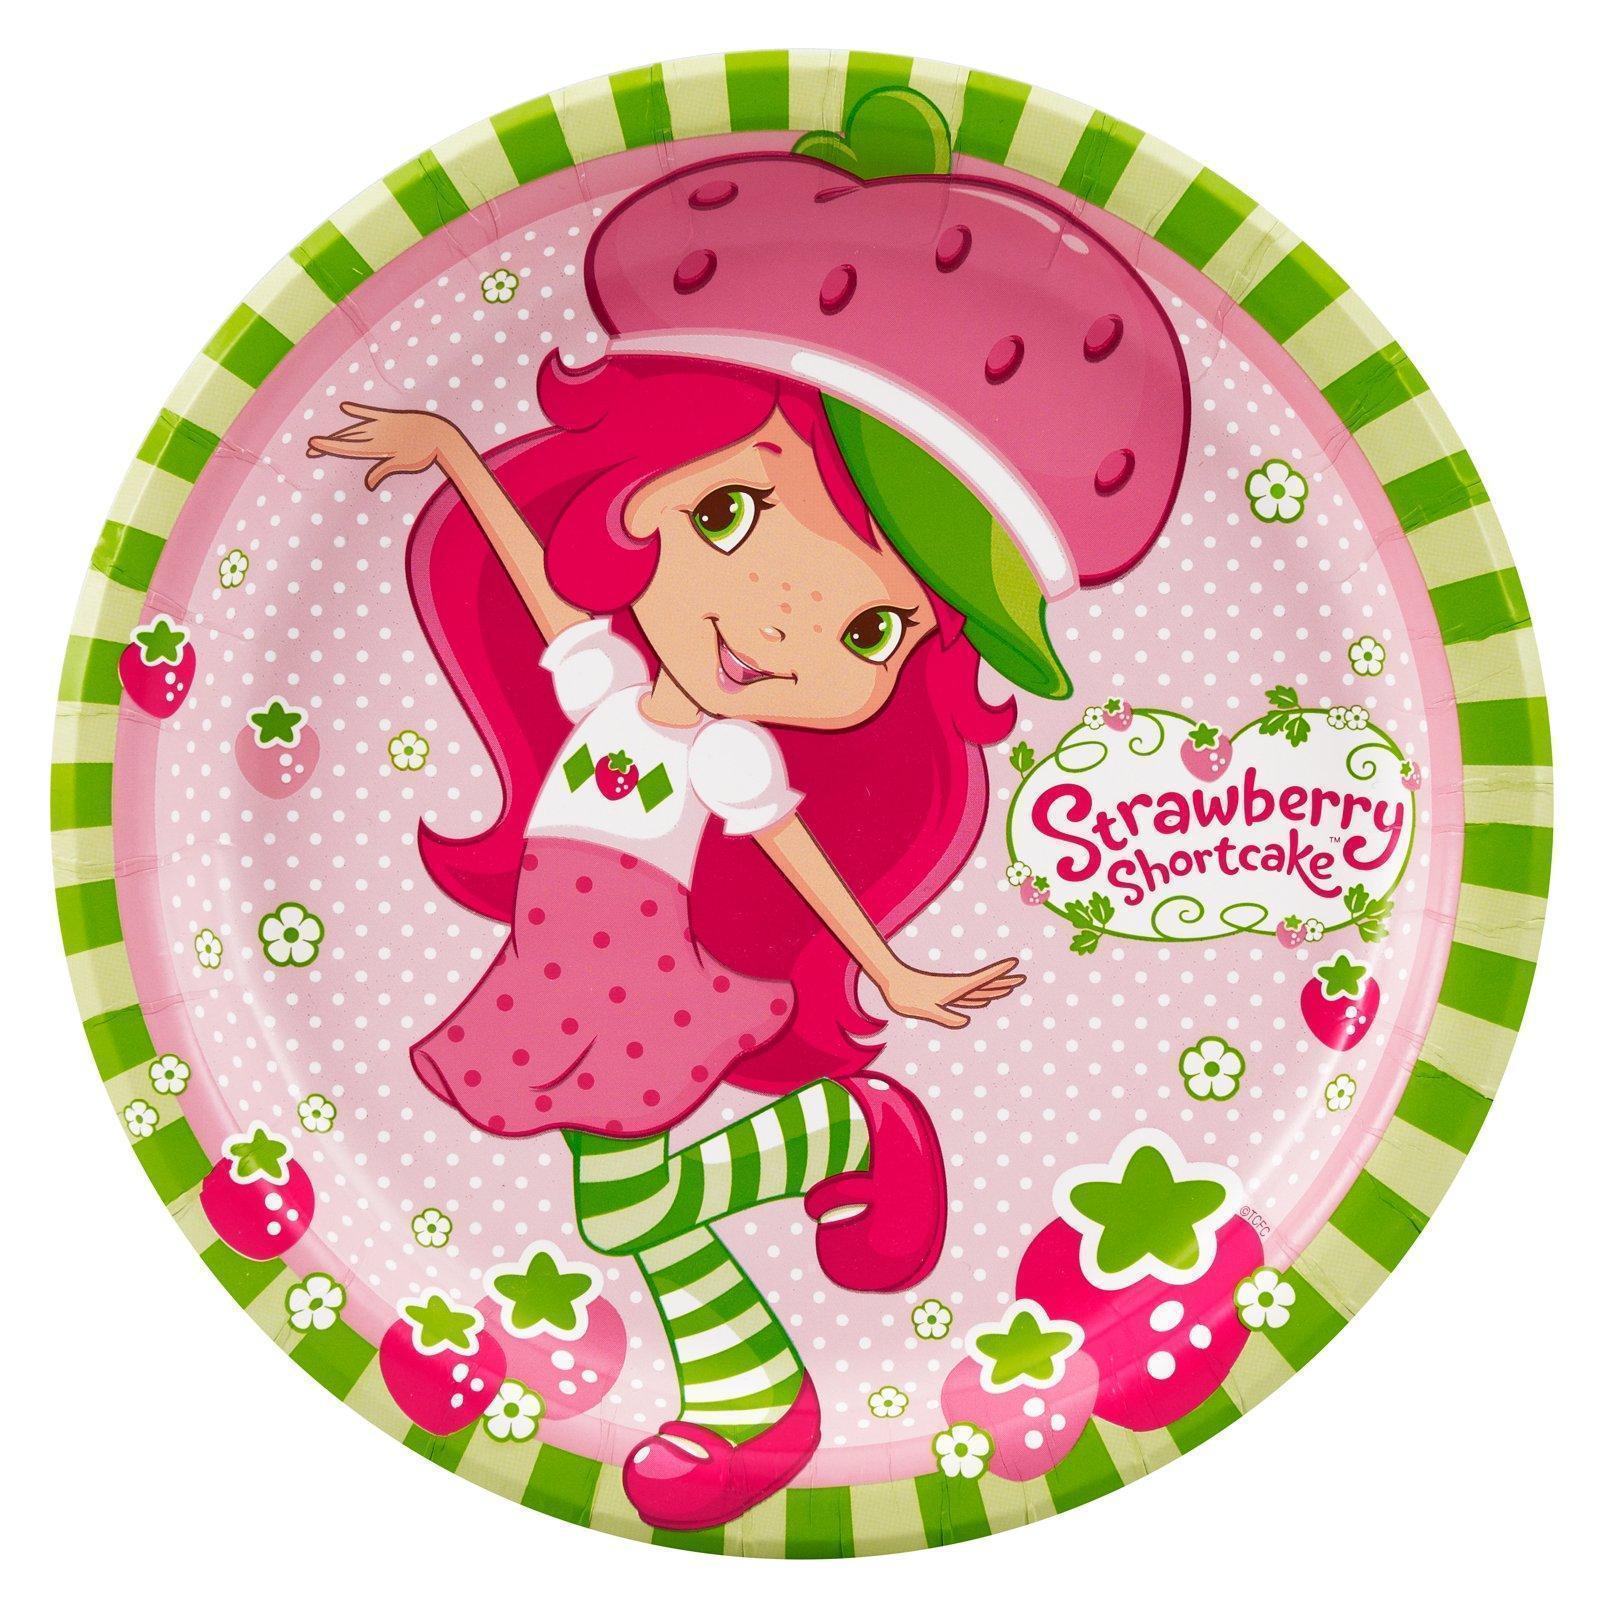 Strawberry Shortcake Cartoon Wallpapers Funny For Facebook  फट शयर